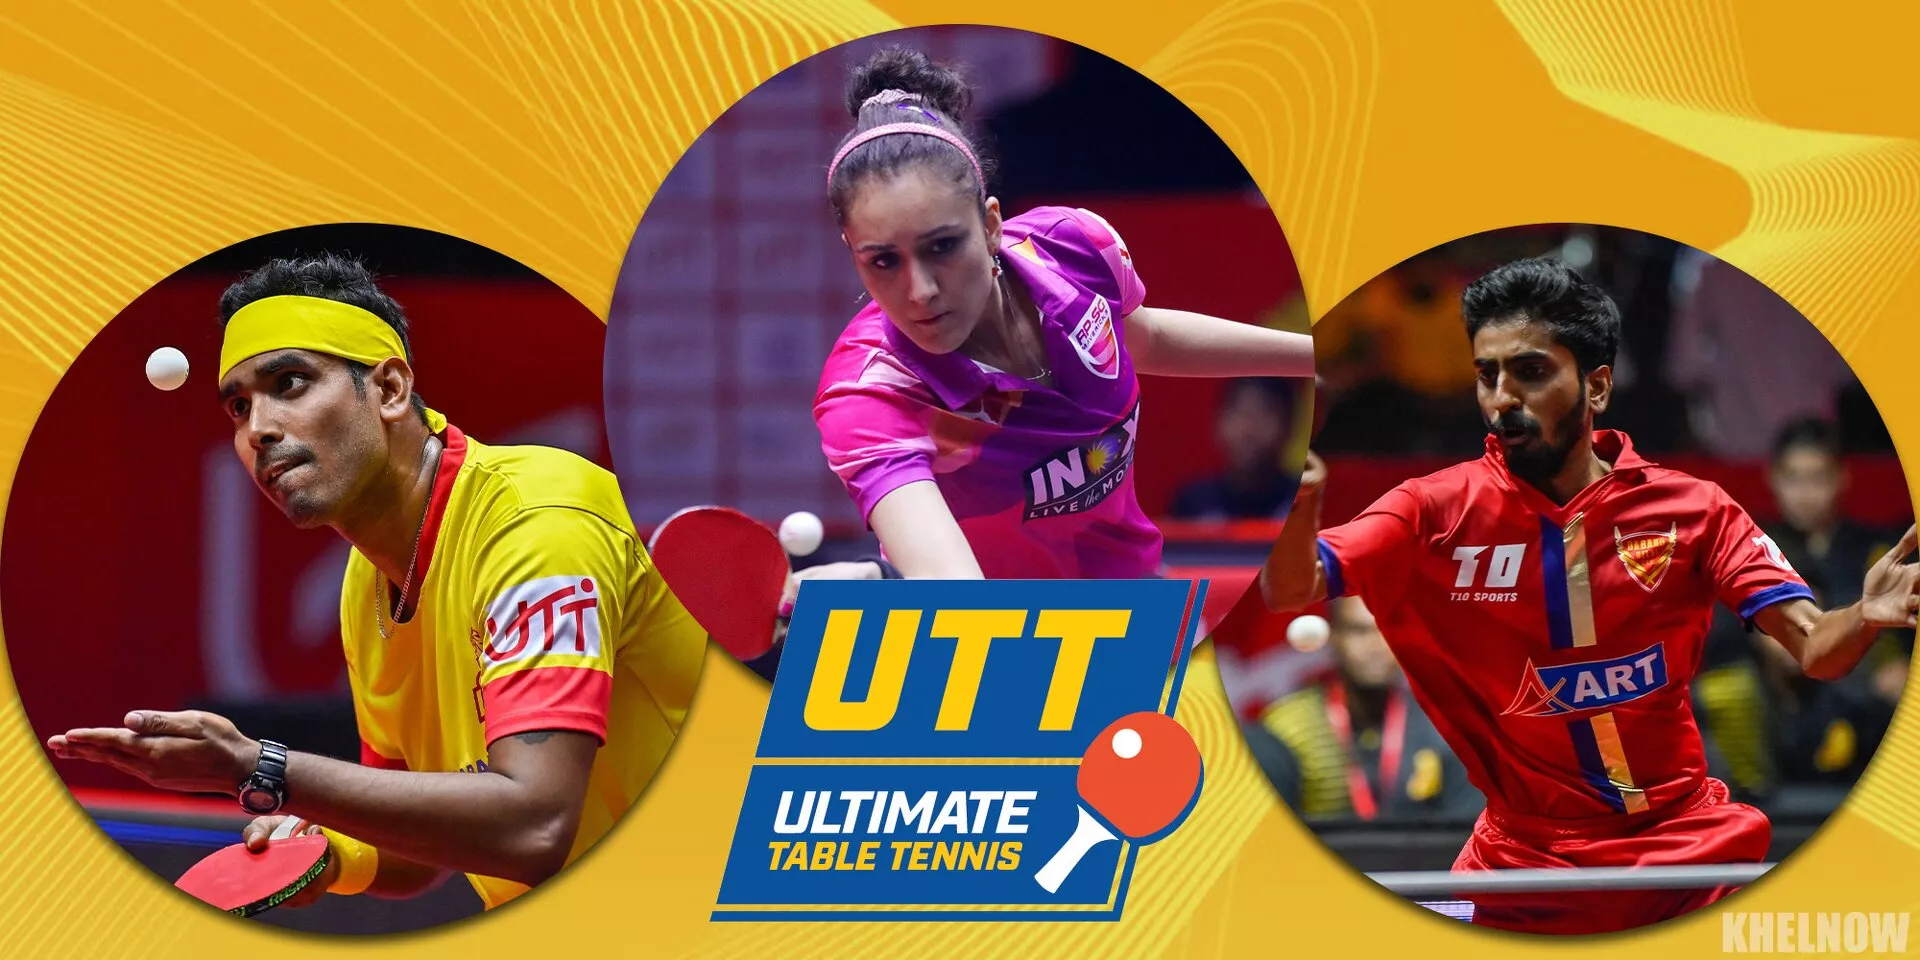 Ultimate Table Tennis 2023 Full schedule, fixtures, results, live streaming details